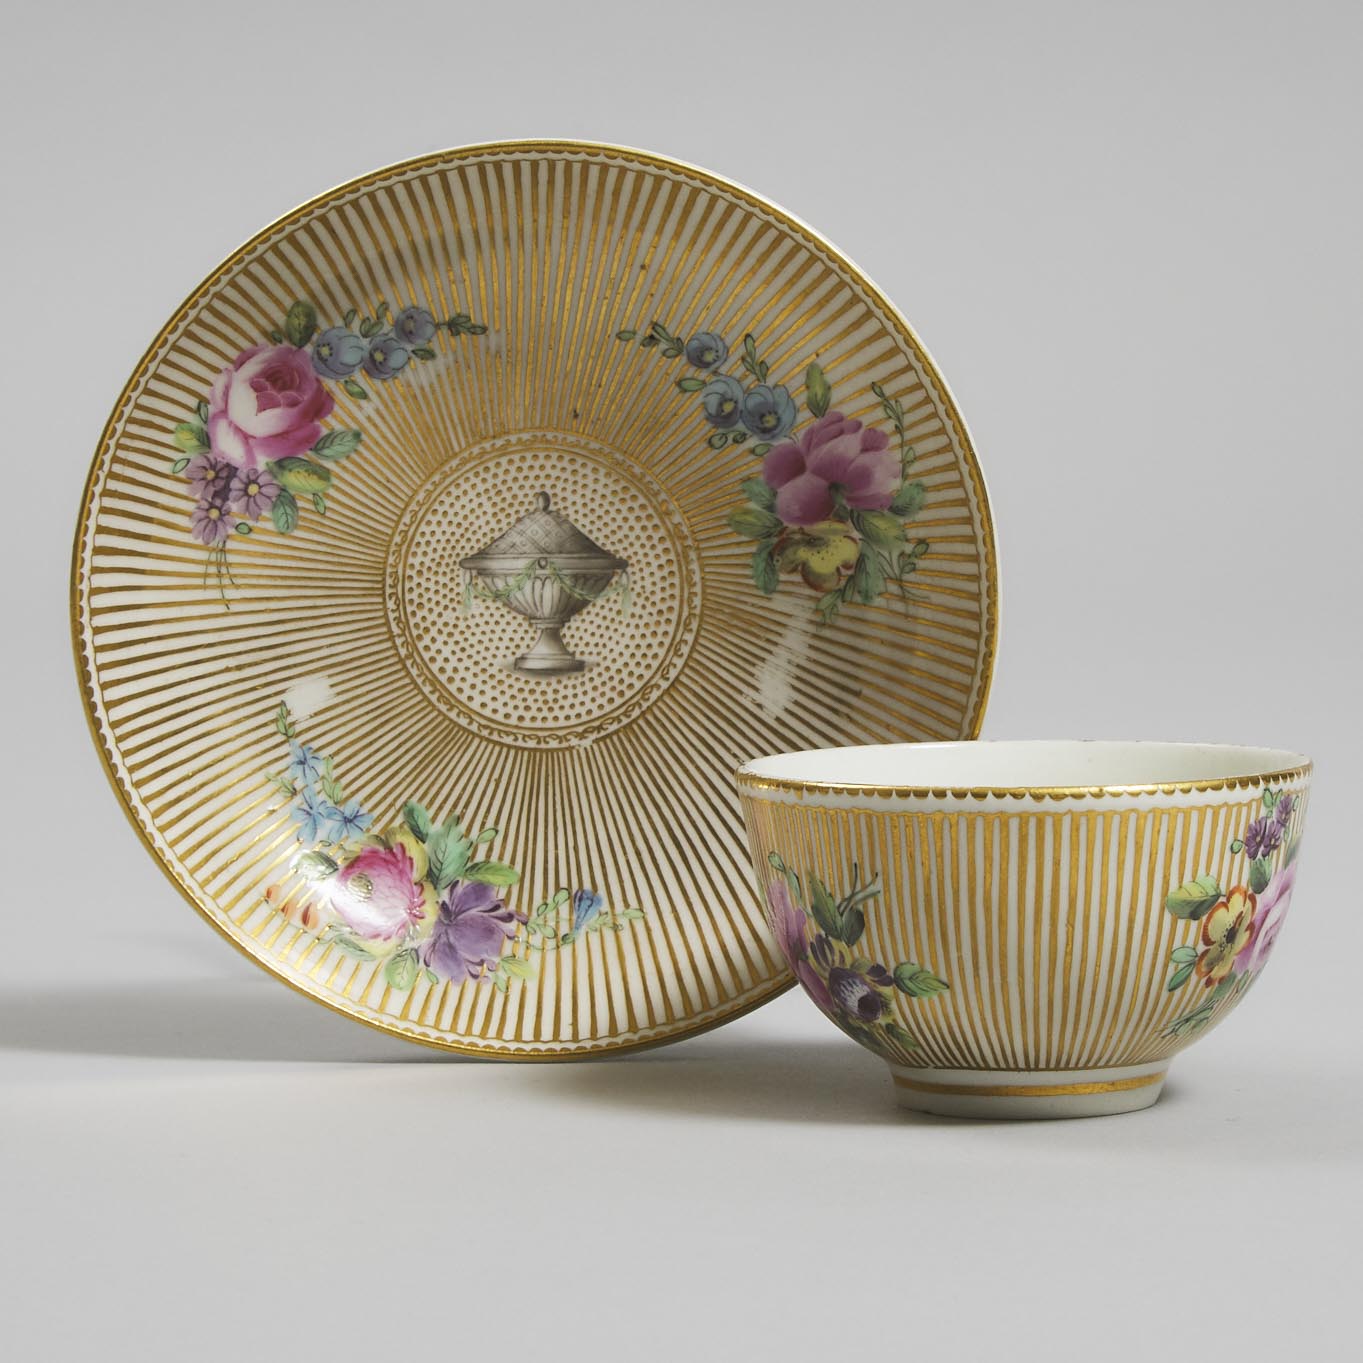 Chelsea-Derby Tea Bowl and Saucer, c.1775